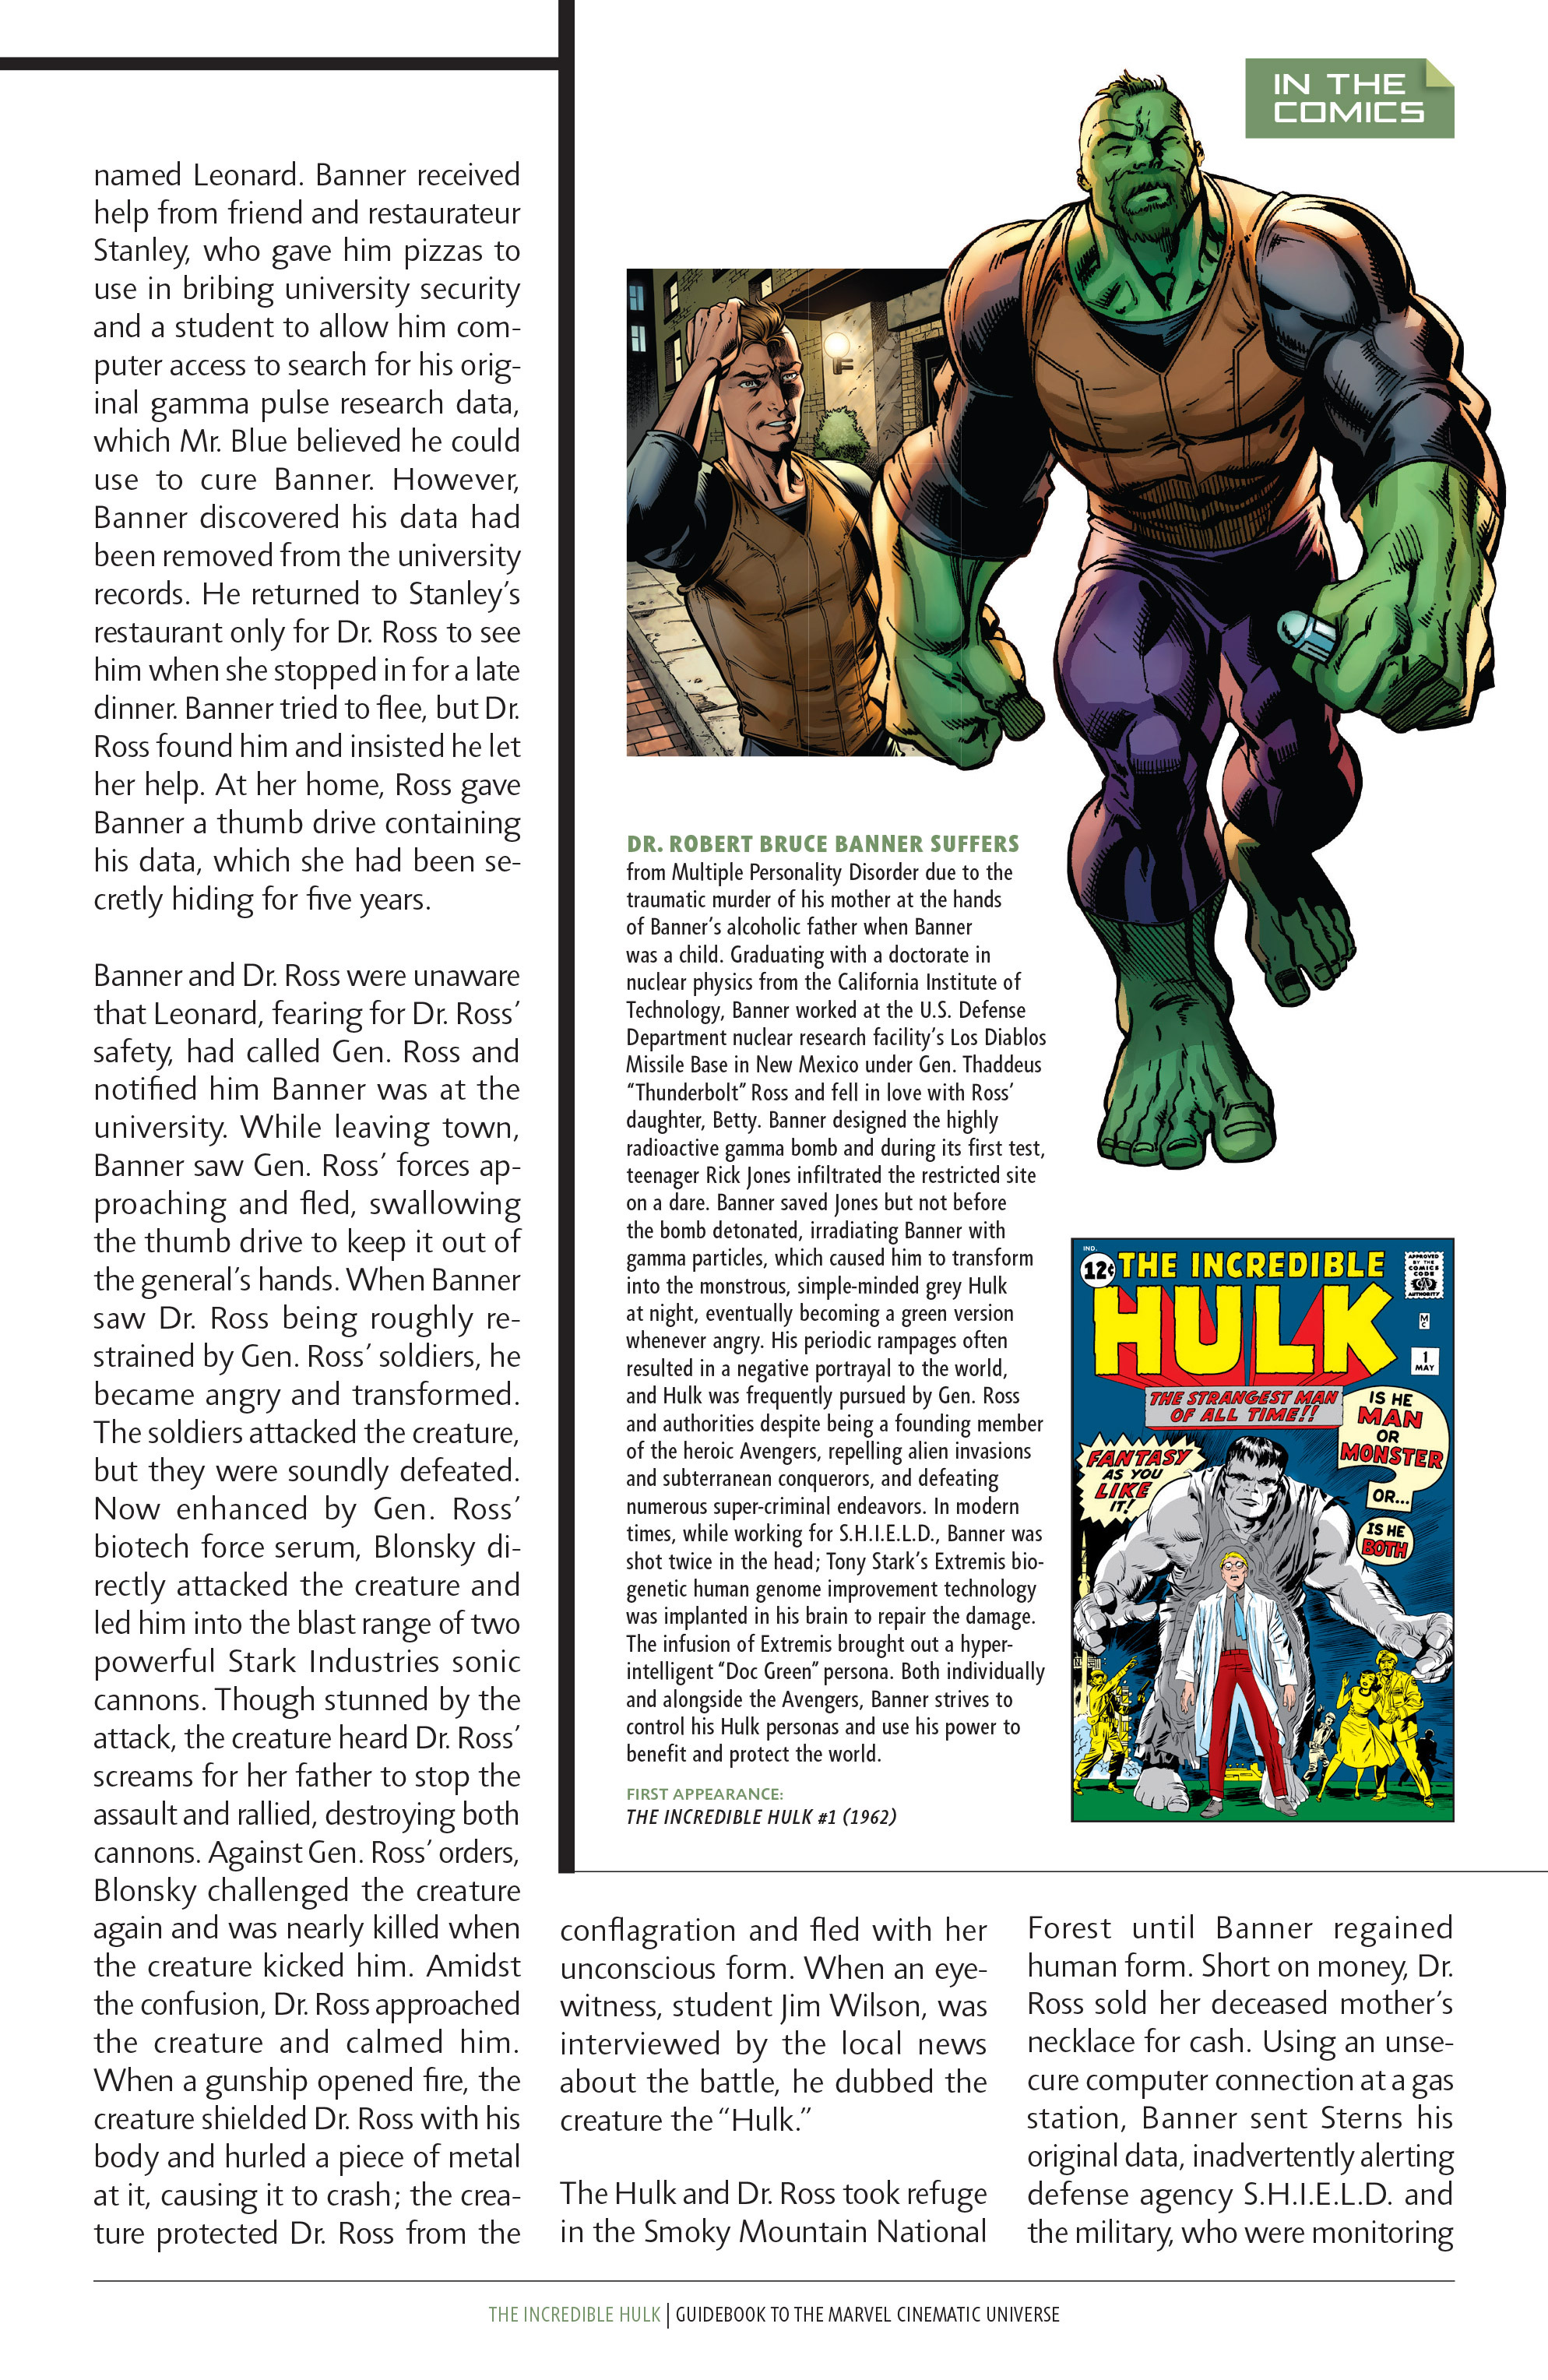 Read online Marvel Cinematic Universe Guidebook comic -  Issue # TPB 1 (Part 1) - 37